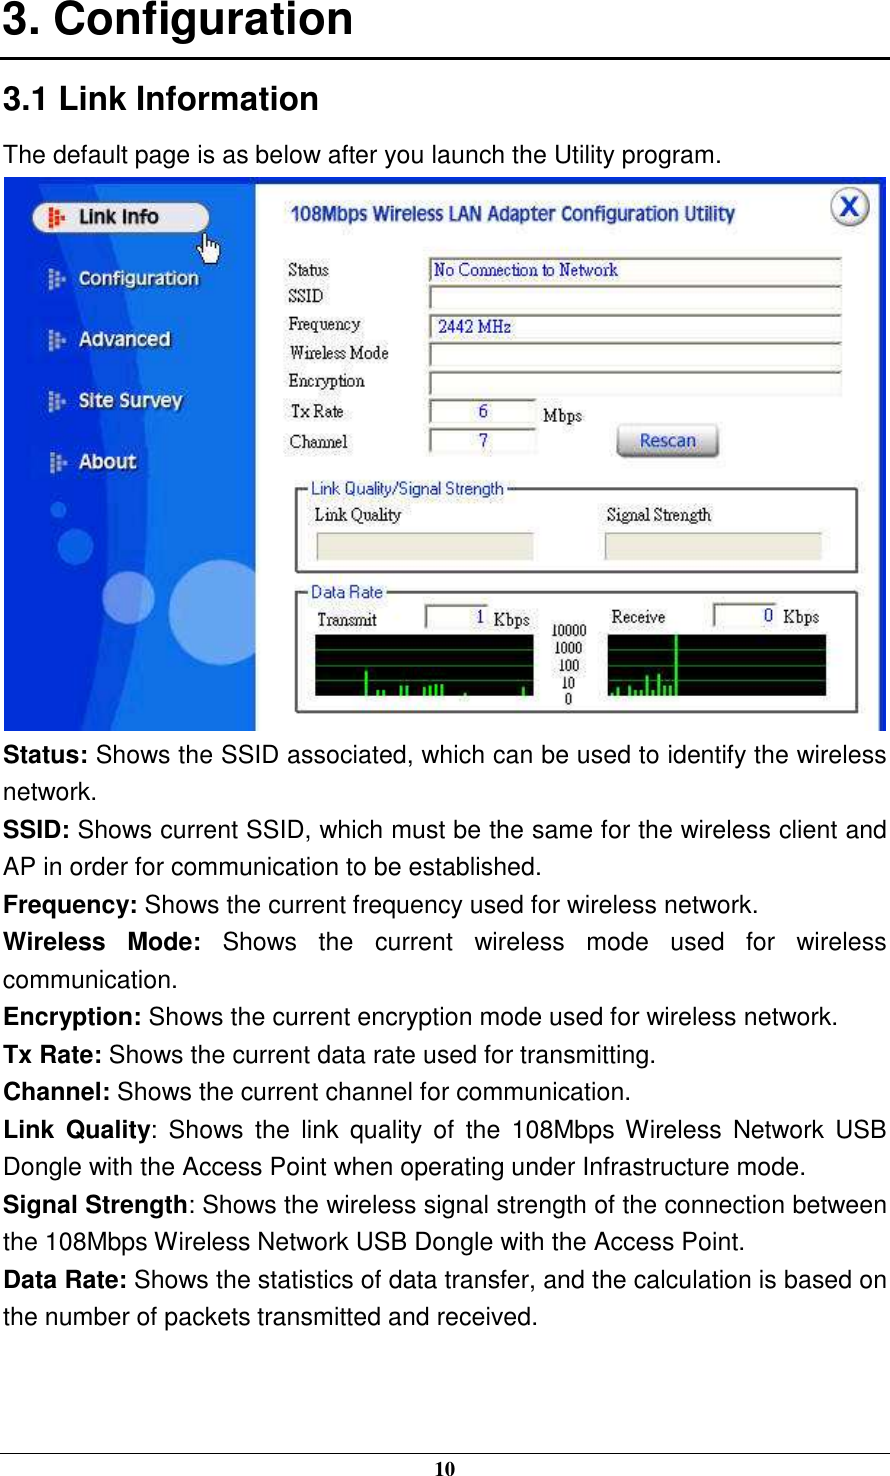  10 3. Configuration 3.1 Link Information The default page is as below after you launch the Utility program.  Status: Shows the SSID associated, which can be used to identify the wireless network. SSID: Shows current SSID, which must be the same for the wireless client and AP in order for communication to be established. Frequency: Shows the current frequency used for wireless network. Wireless  Mode:  Shows  the  current  wireless  mode  used  for  wireless communication. Encryption: Shows the current encryption mode used for wireless network. Tx Rate: Shows the current data rate used for transmitting. Channel: Shows the current channel for communication. Link  Quality:  Shows  the  link  quality  of  the  108Mbps Wireless  Network  USB Dongle with the Access Point when operating under Infrastructure mode. Signal Strength: Shows the wireless signal strength of the connection between the 108Mbps Wireless Network USB Dongle with the Access Point. Data Rate: Shows the statistics of data transfer, and the calculation is based on the number of packets transmitted and received. 